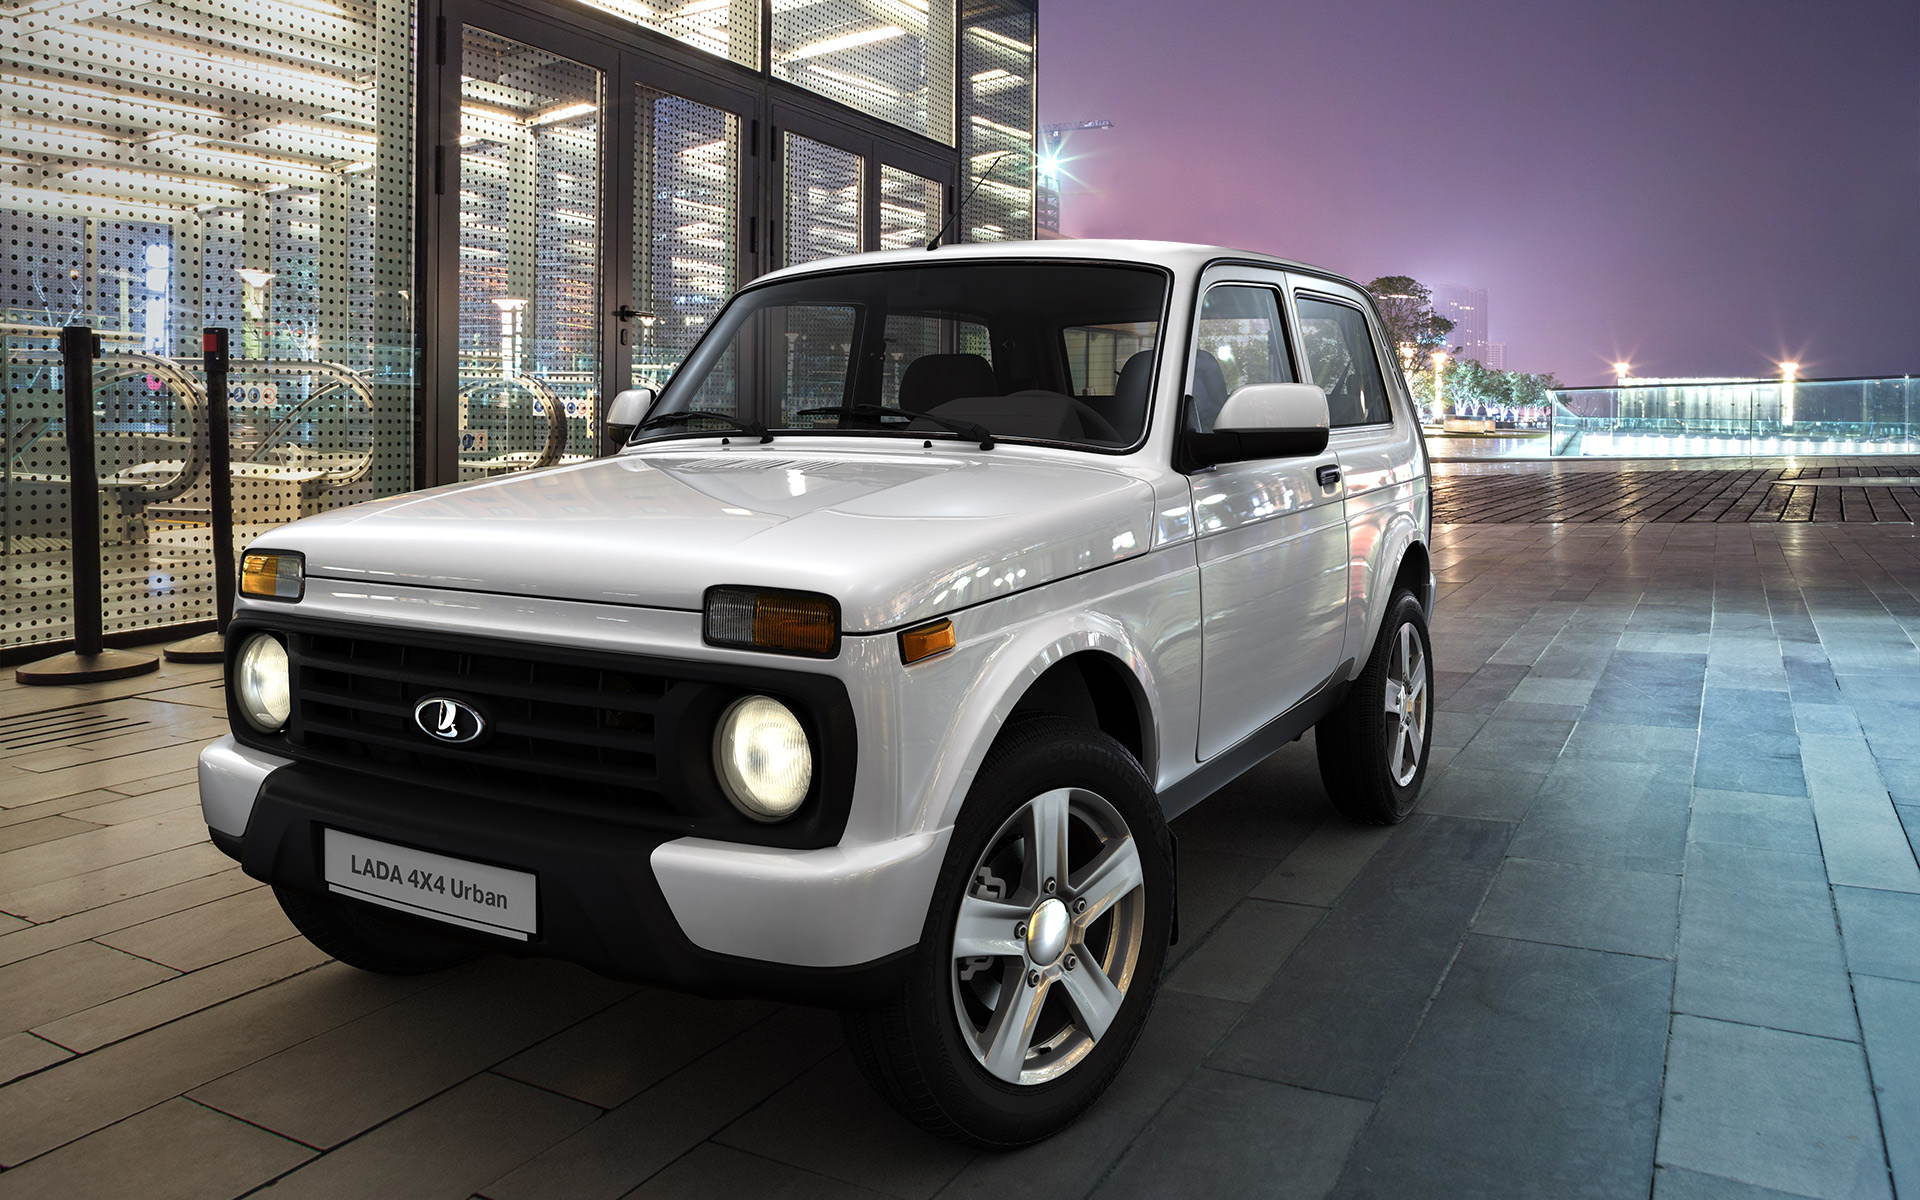 Lada Cars Are Entering The Tunisian Market Images, Photos, Reviews